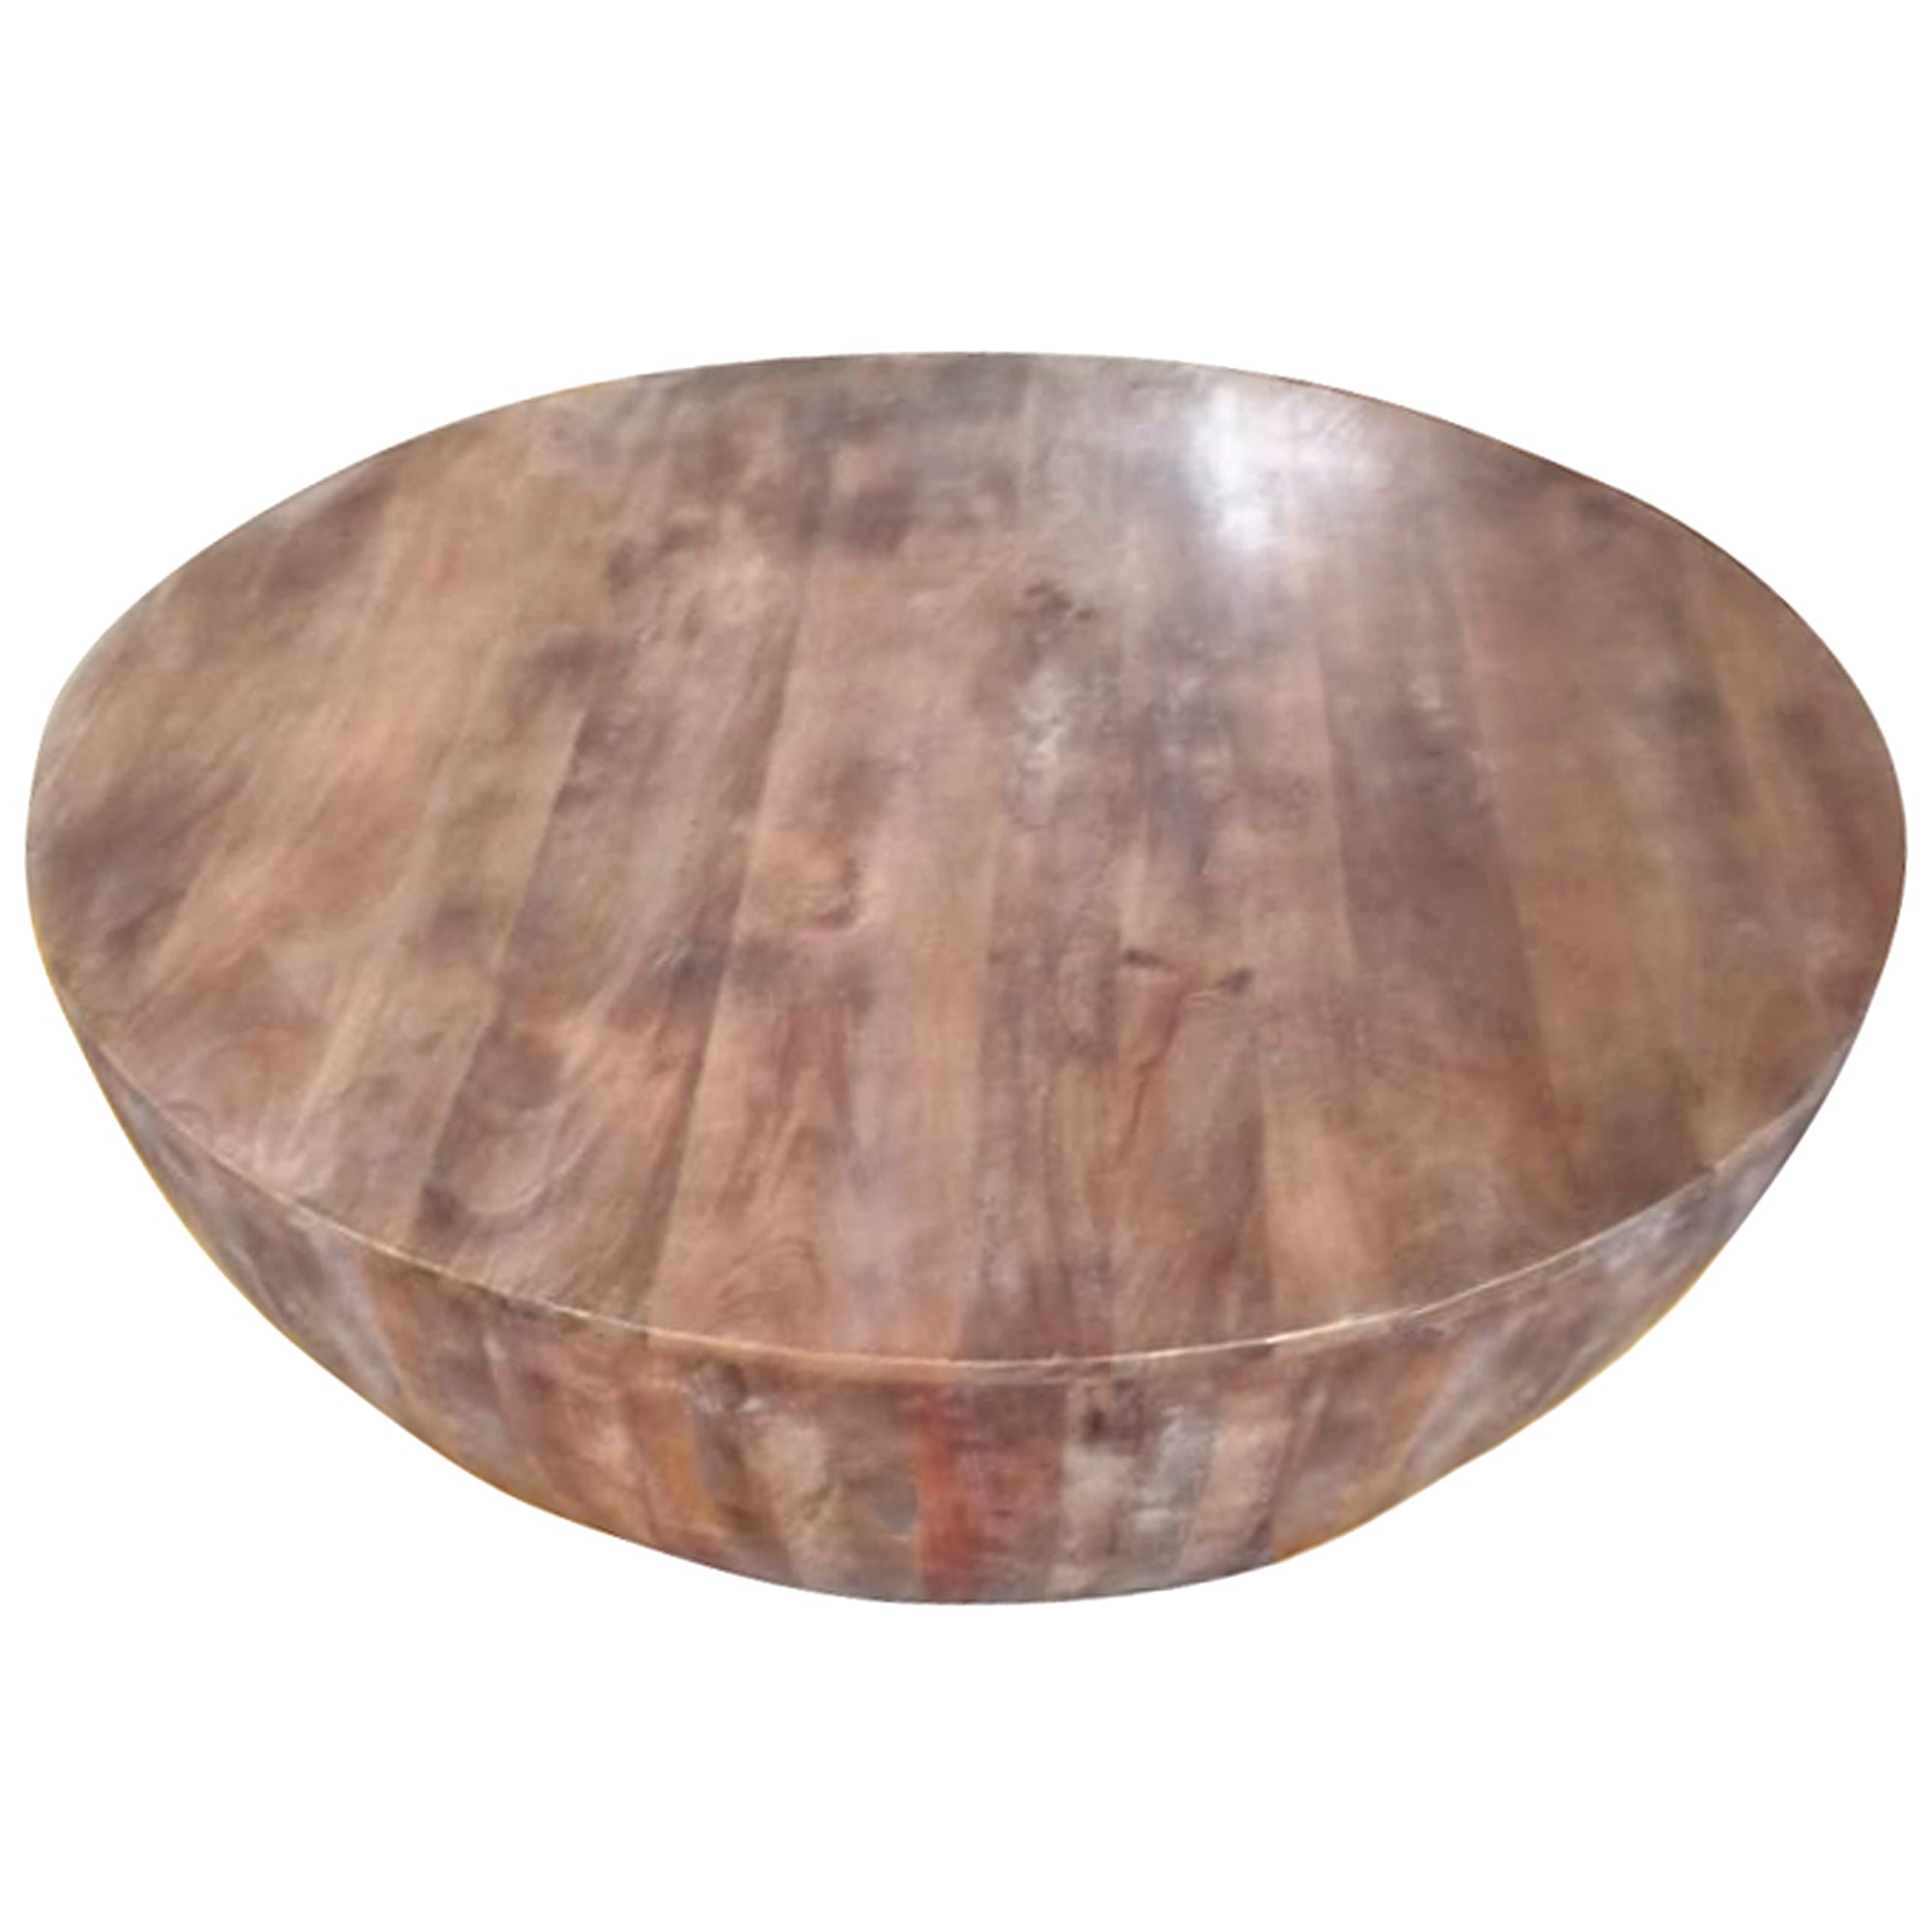 Handcarved Drum Shape Round Top Mango Wood Distressed Wooden Coffee Table - Brown